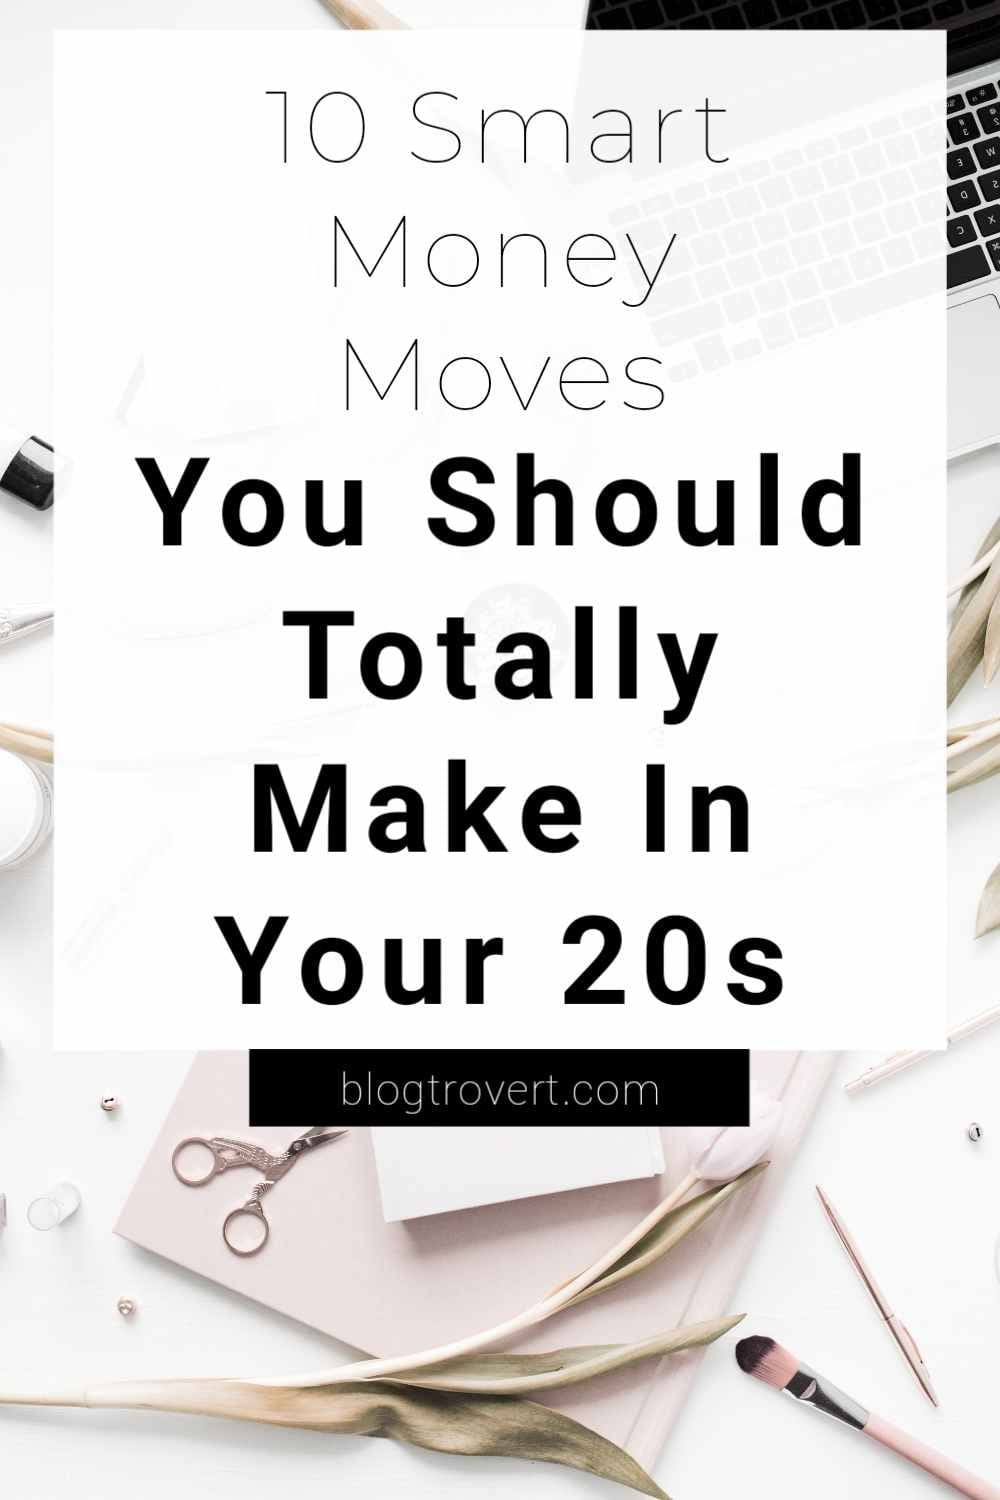 10 Smart Money Moves to Make in Your 20s for a better future 4